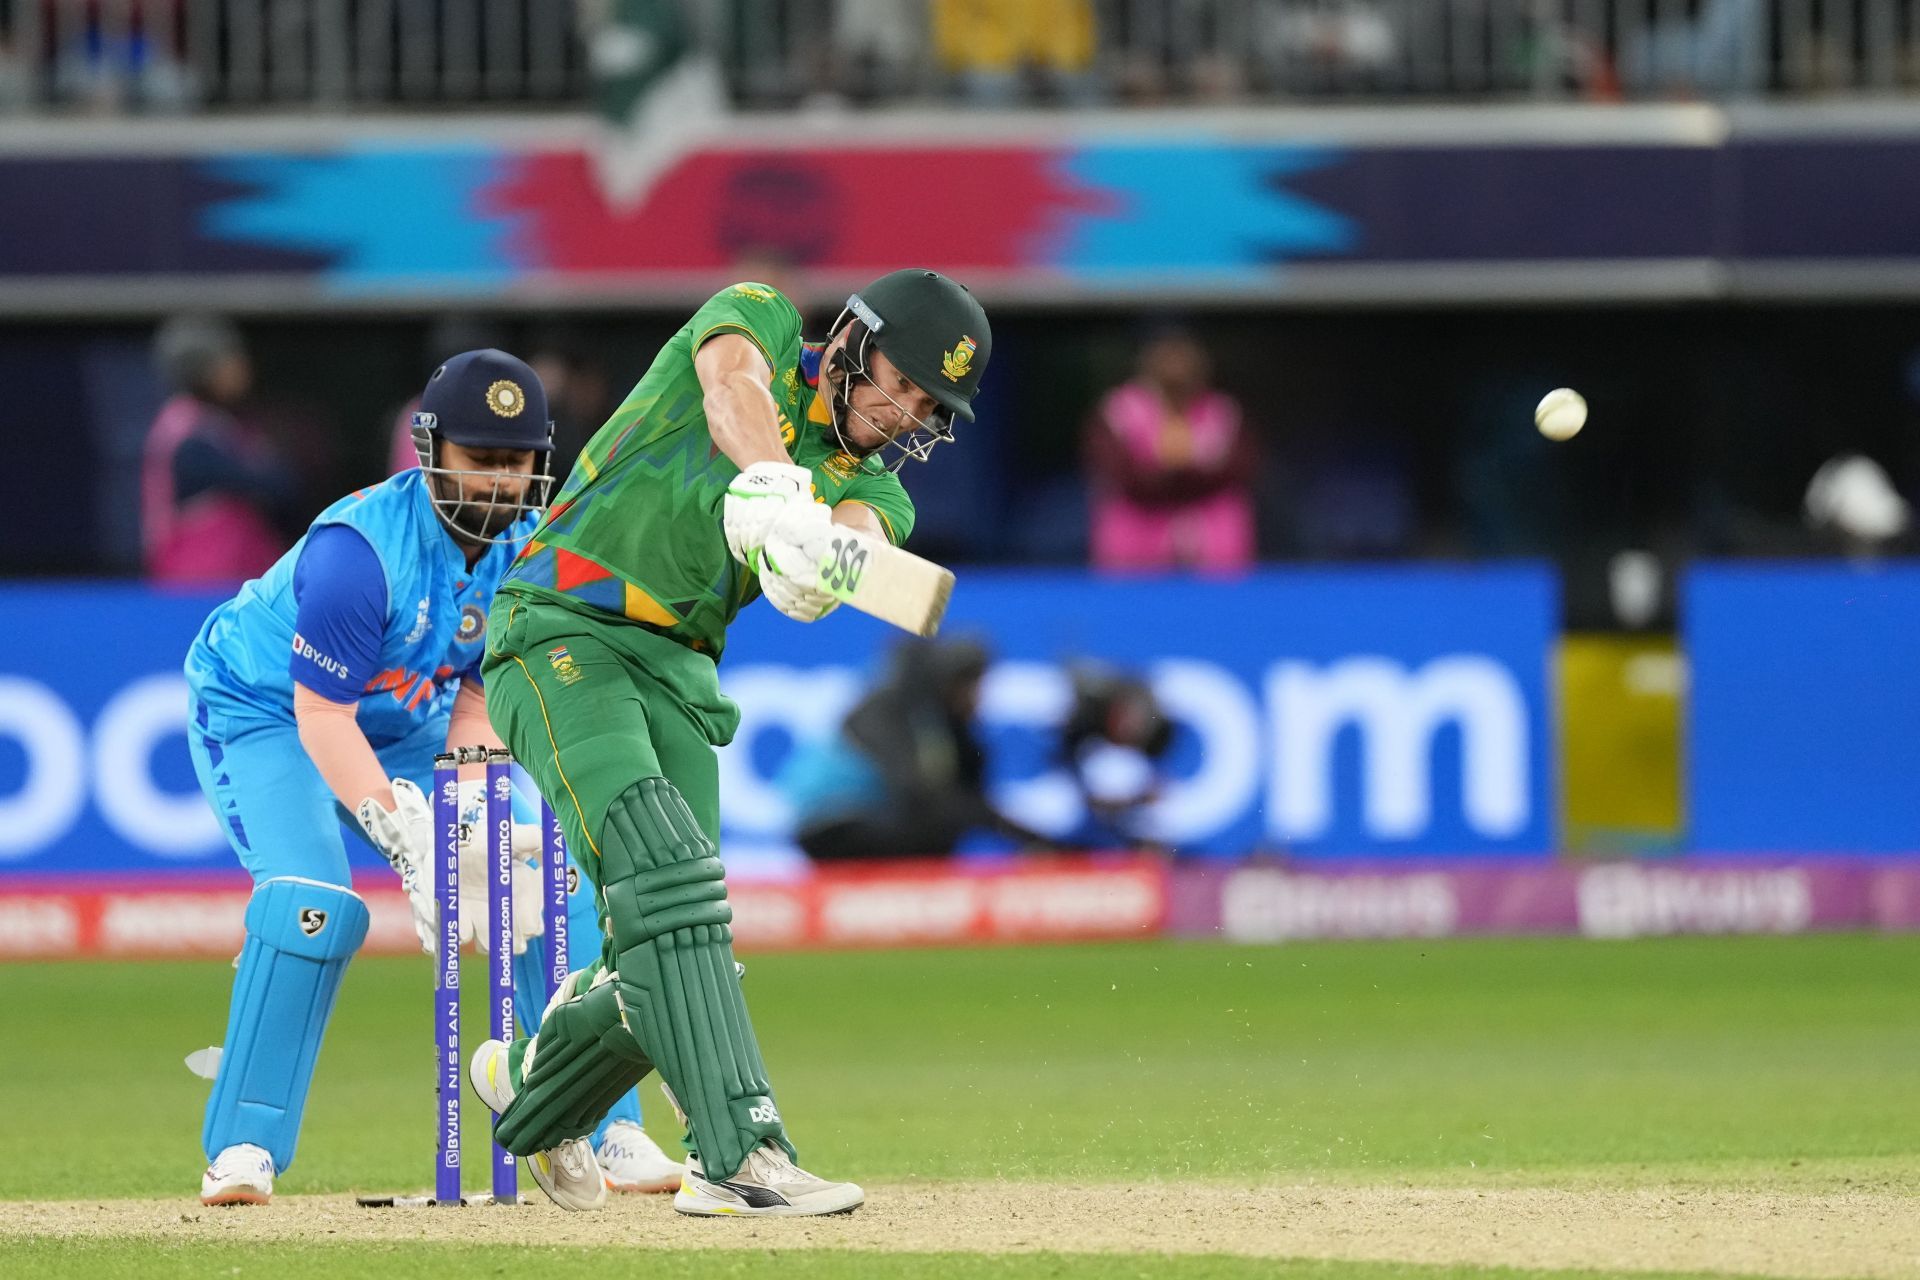 David Miller has played some cracking knocks against India in T20Is. (Pic: Getty Images)